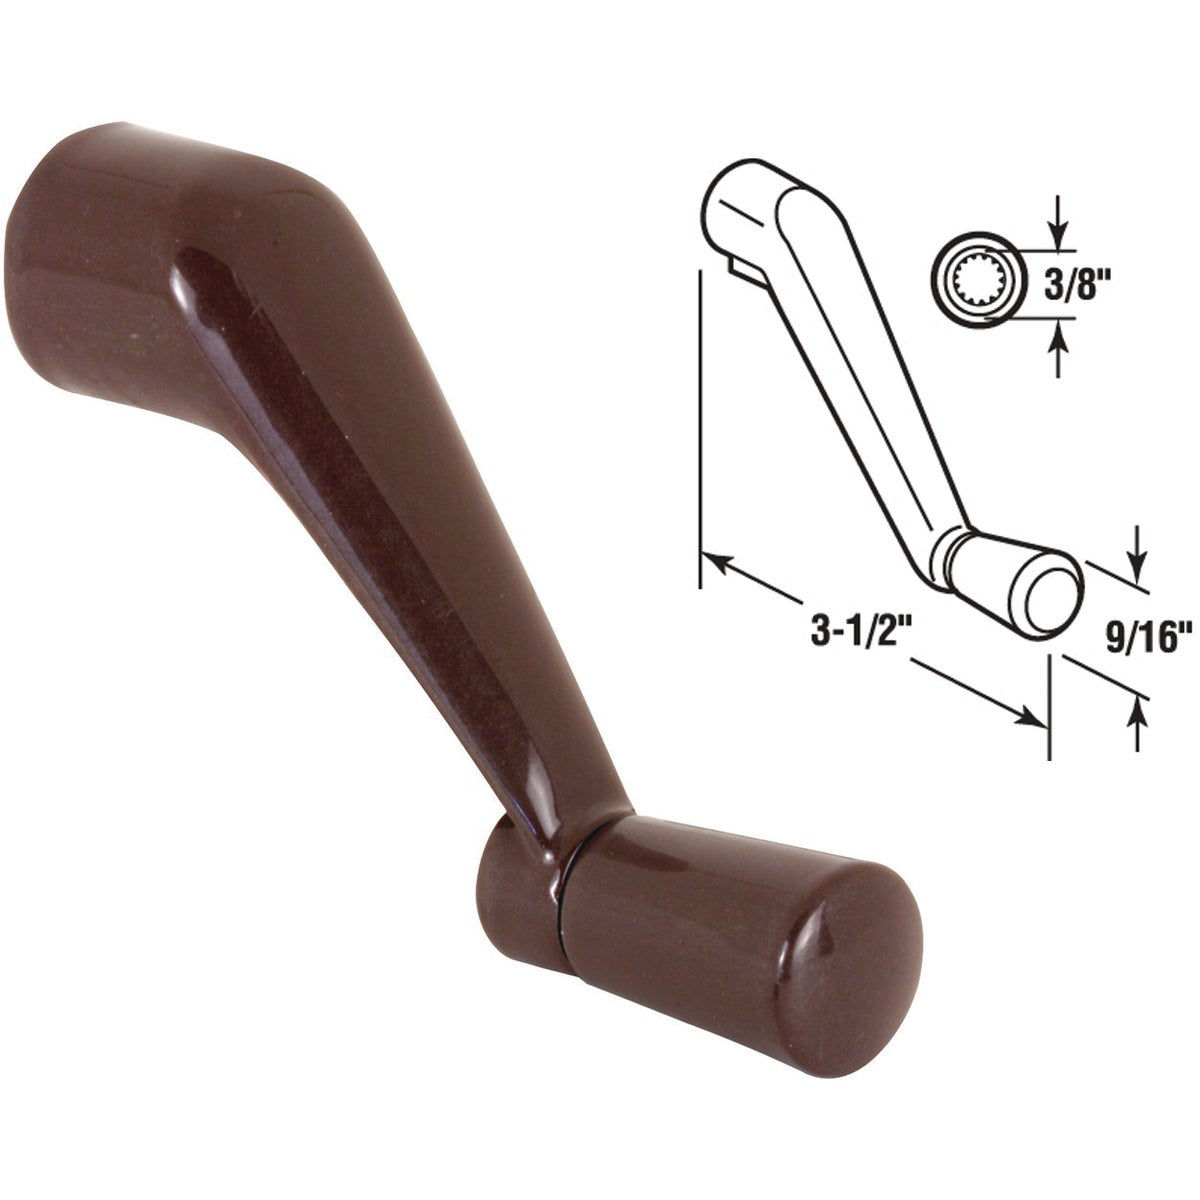 What Is a Crank Handle Used For?